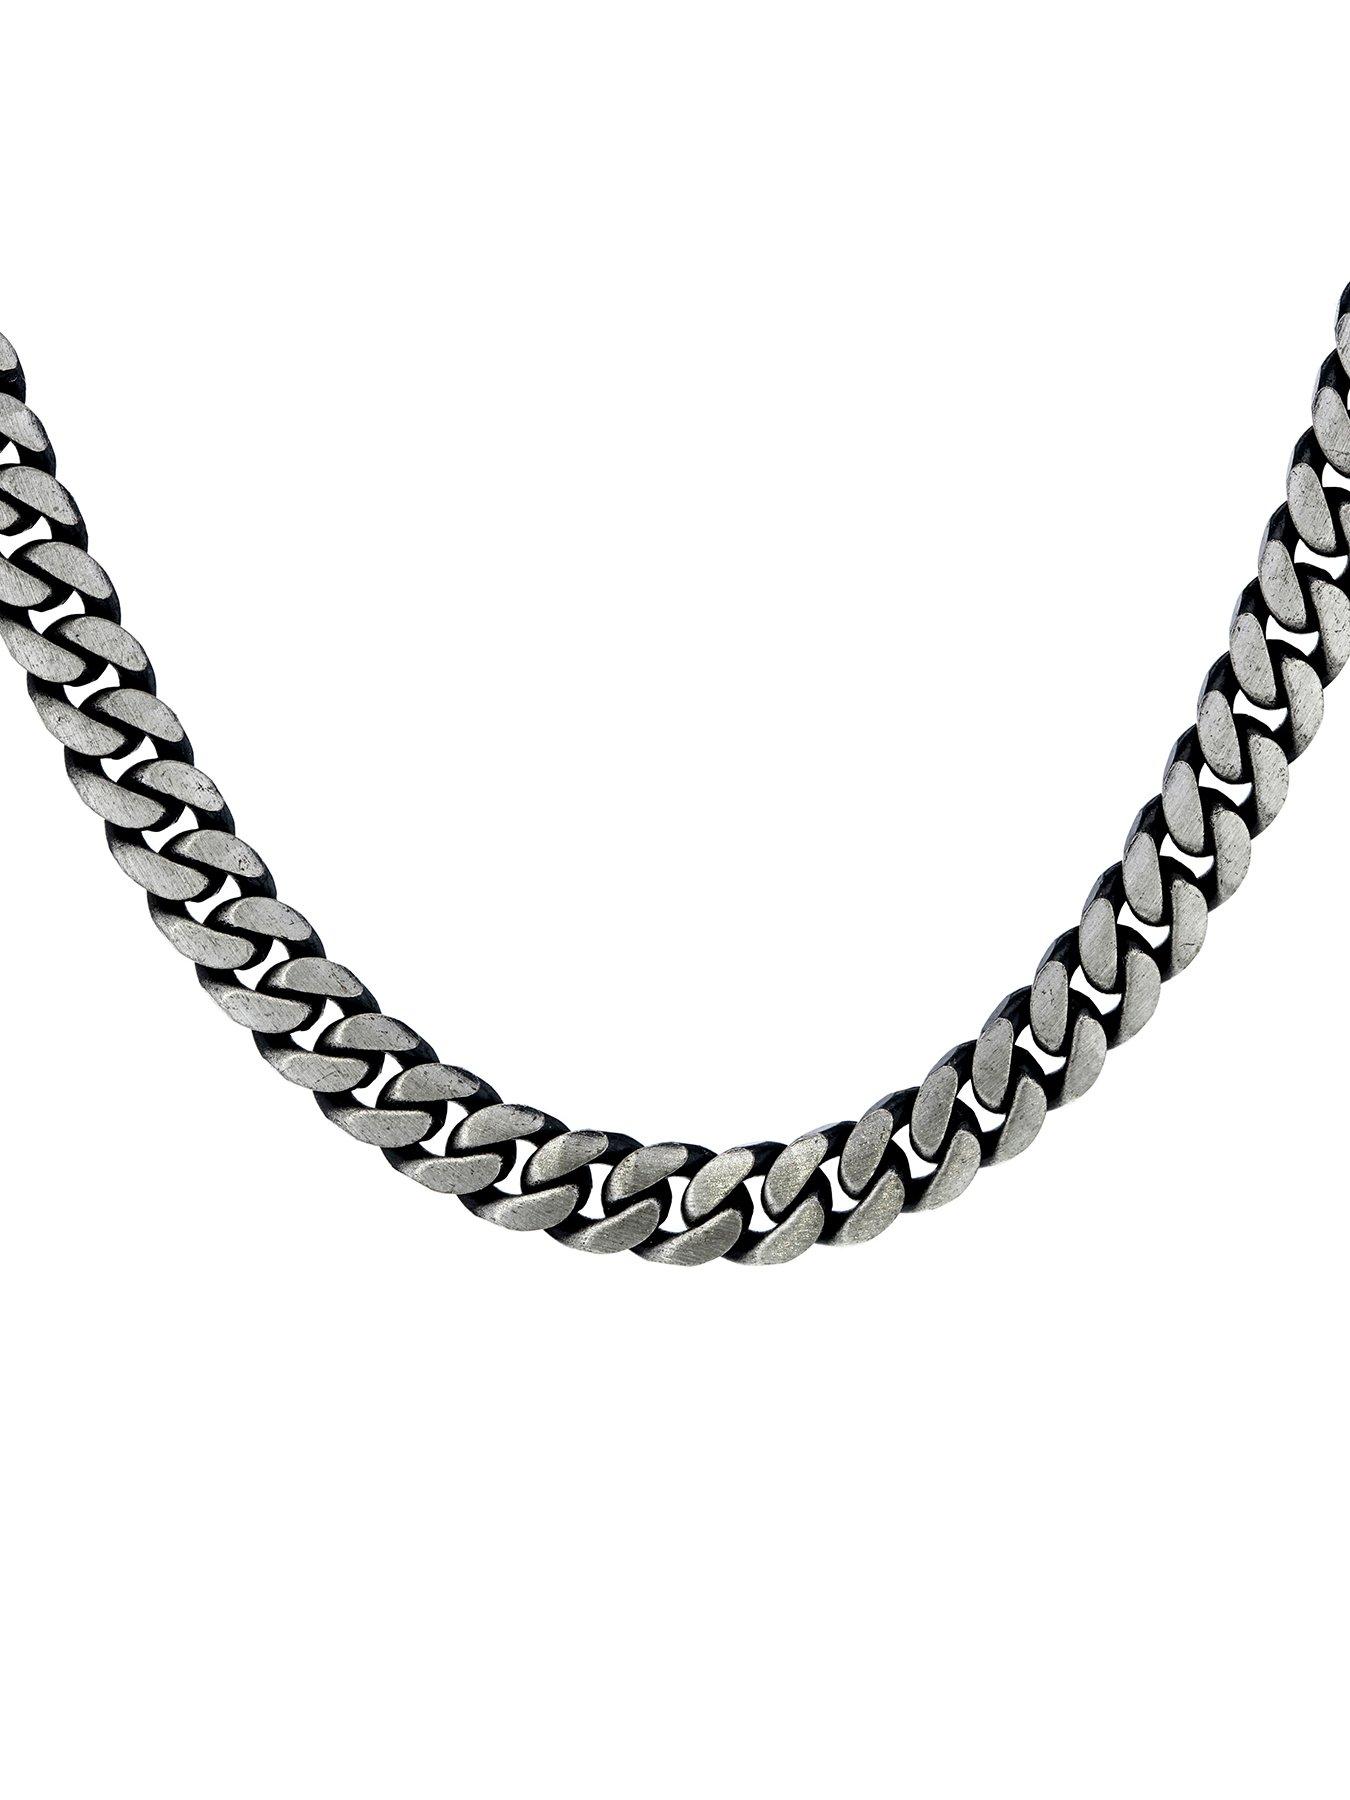 Jewellery & watches Sterling Silver Oxidized Grey Curb Chain Necklace